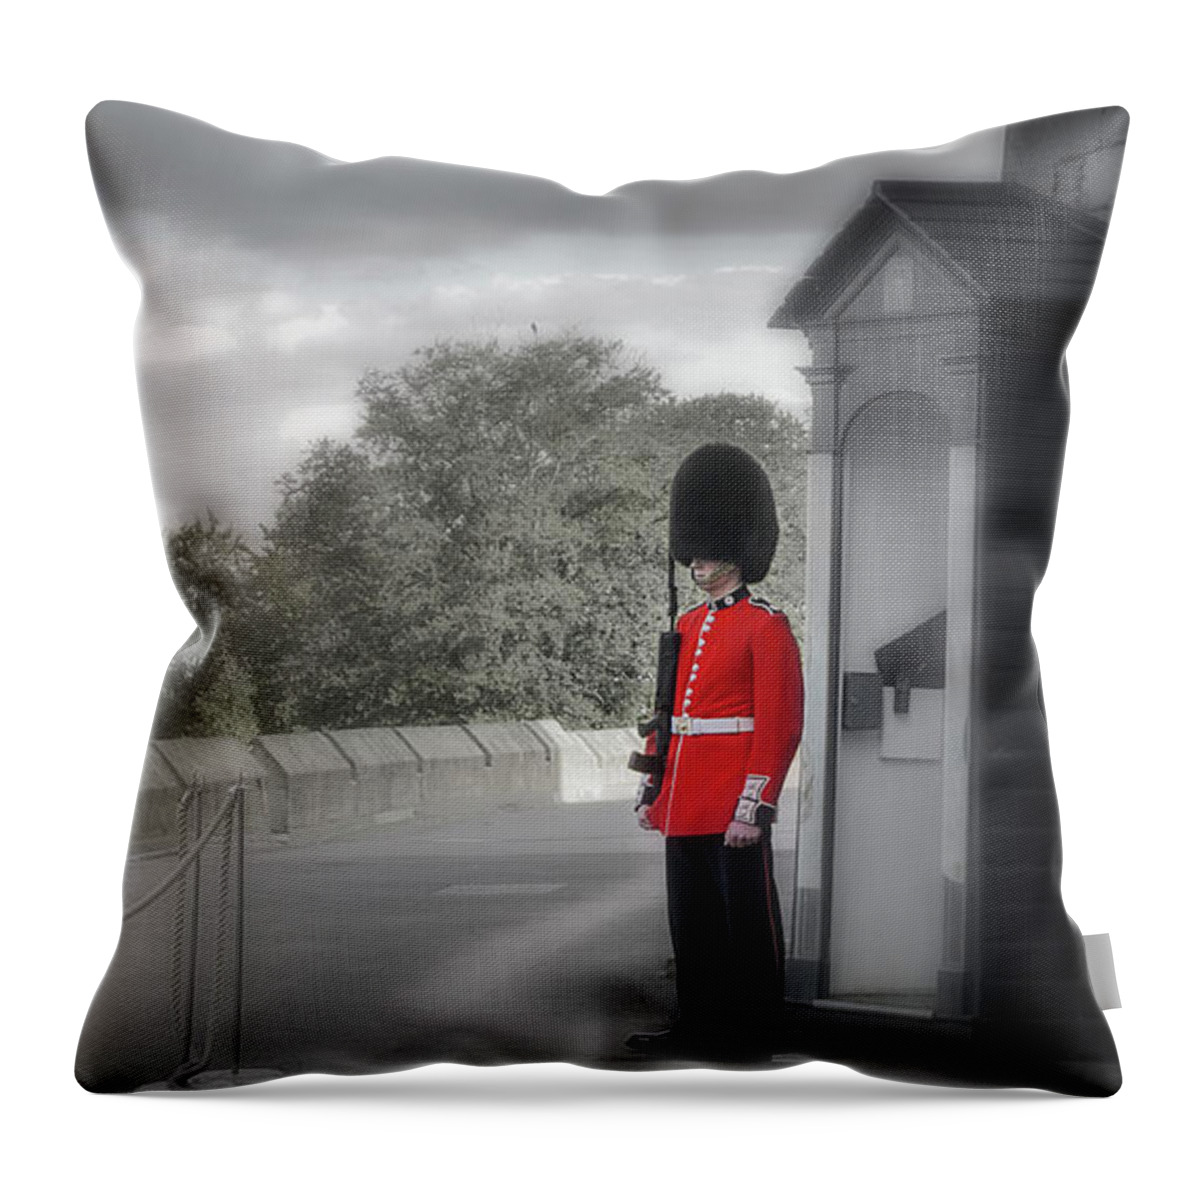 Royal Guard Throw Pillow featuring the photograph Windsor Castle Guard by Joe Winkler